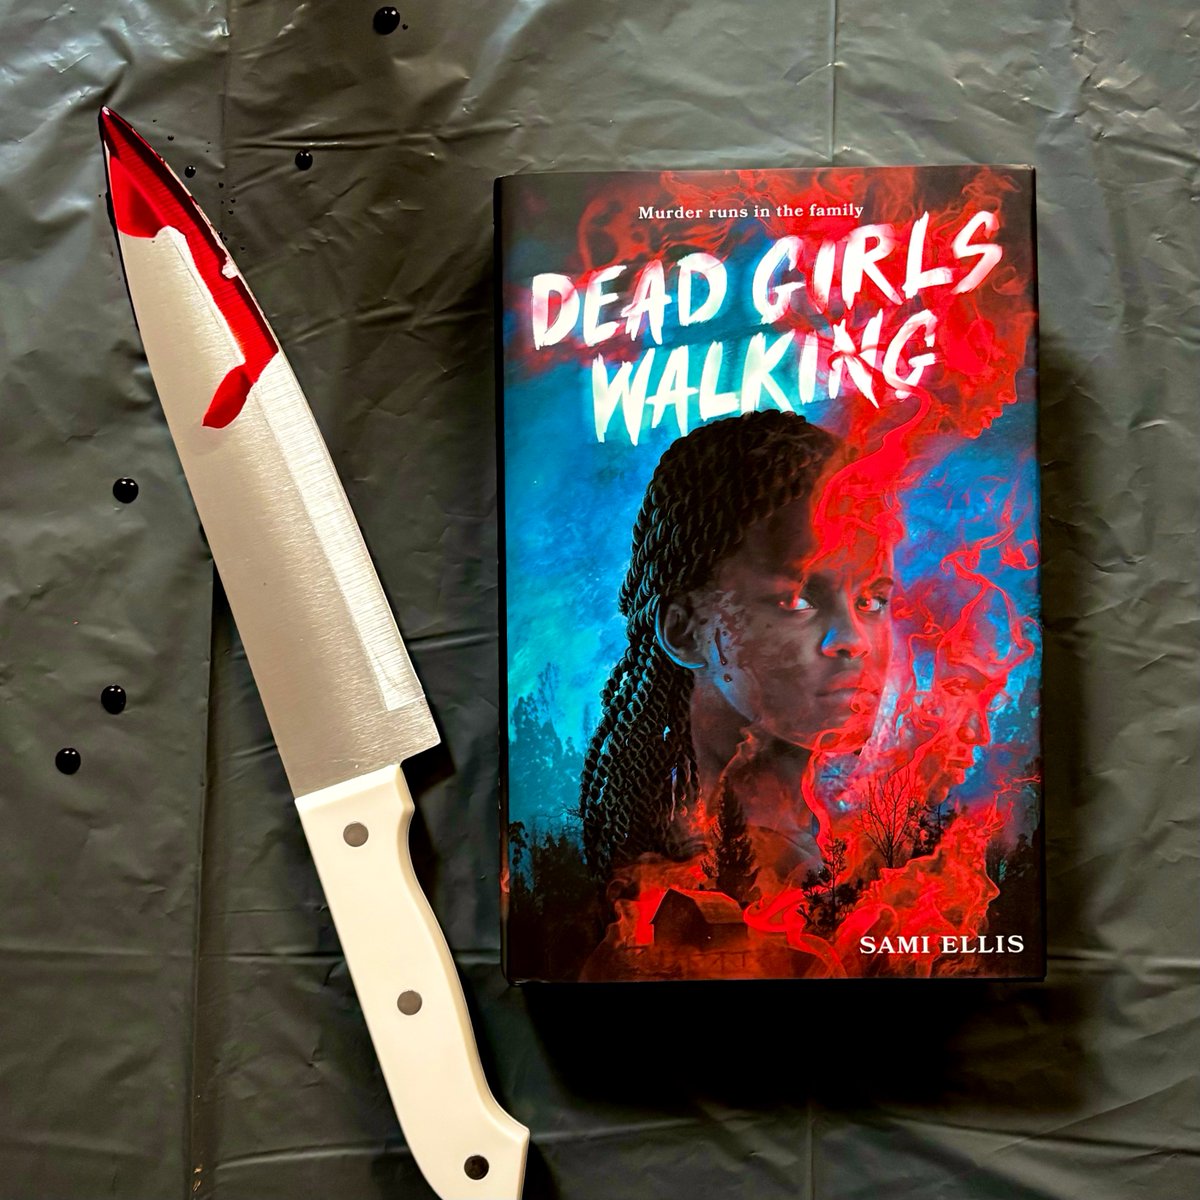 Brace yourself for #DeadGirlsWalkingBook, a shocking YA slasher from @themoosef! Join Temple as she searches for answers in the woods that were once her serial killer father’s hunting grounds. Grab a copy & get ready to face your fears today! #BookBirthday bit.ly/4byNhNL